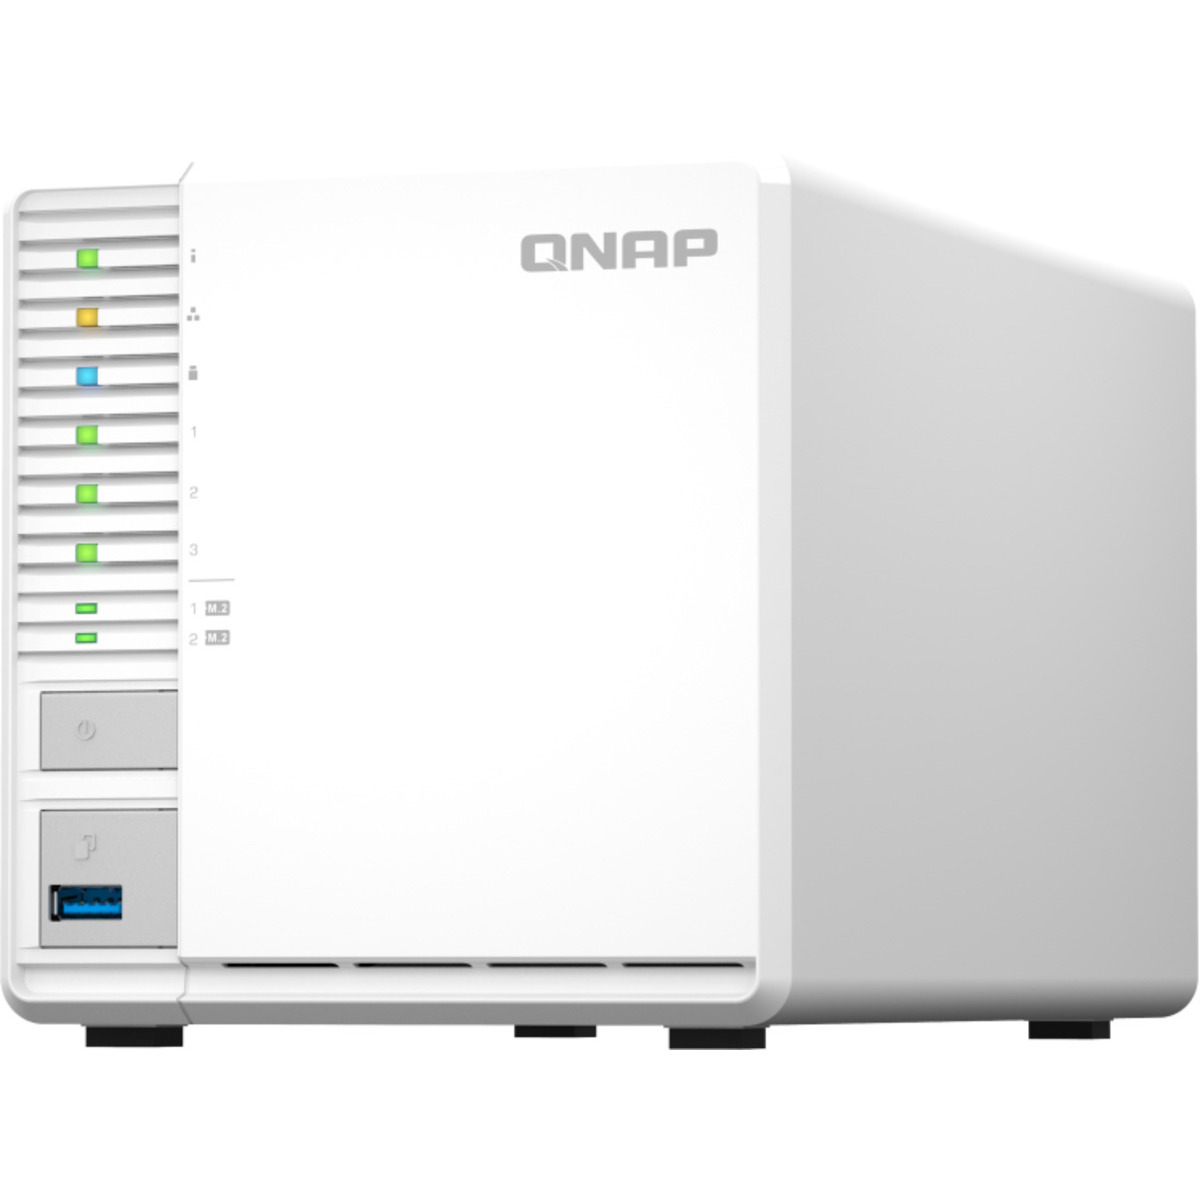 buy $1739 QNAP TS-364 60tb Desktop NAS - Network Attached Storage Device 3x20000gb Seagate EXOS X20 ST20000NM007D 3.5 7200rpm SATA 6Gb/s HDD ENTERPRISE Class Drives Installed - Burn-In Tested - nas headquarters buy network attached storage server device das new raid-5 free shipping simply usa TS-364